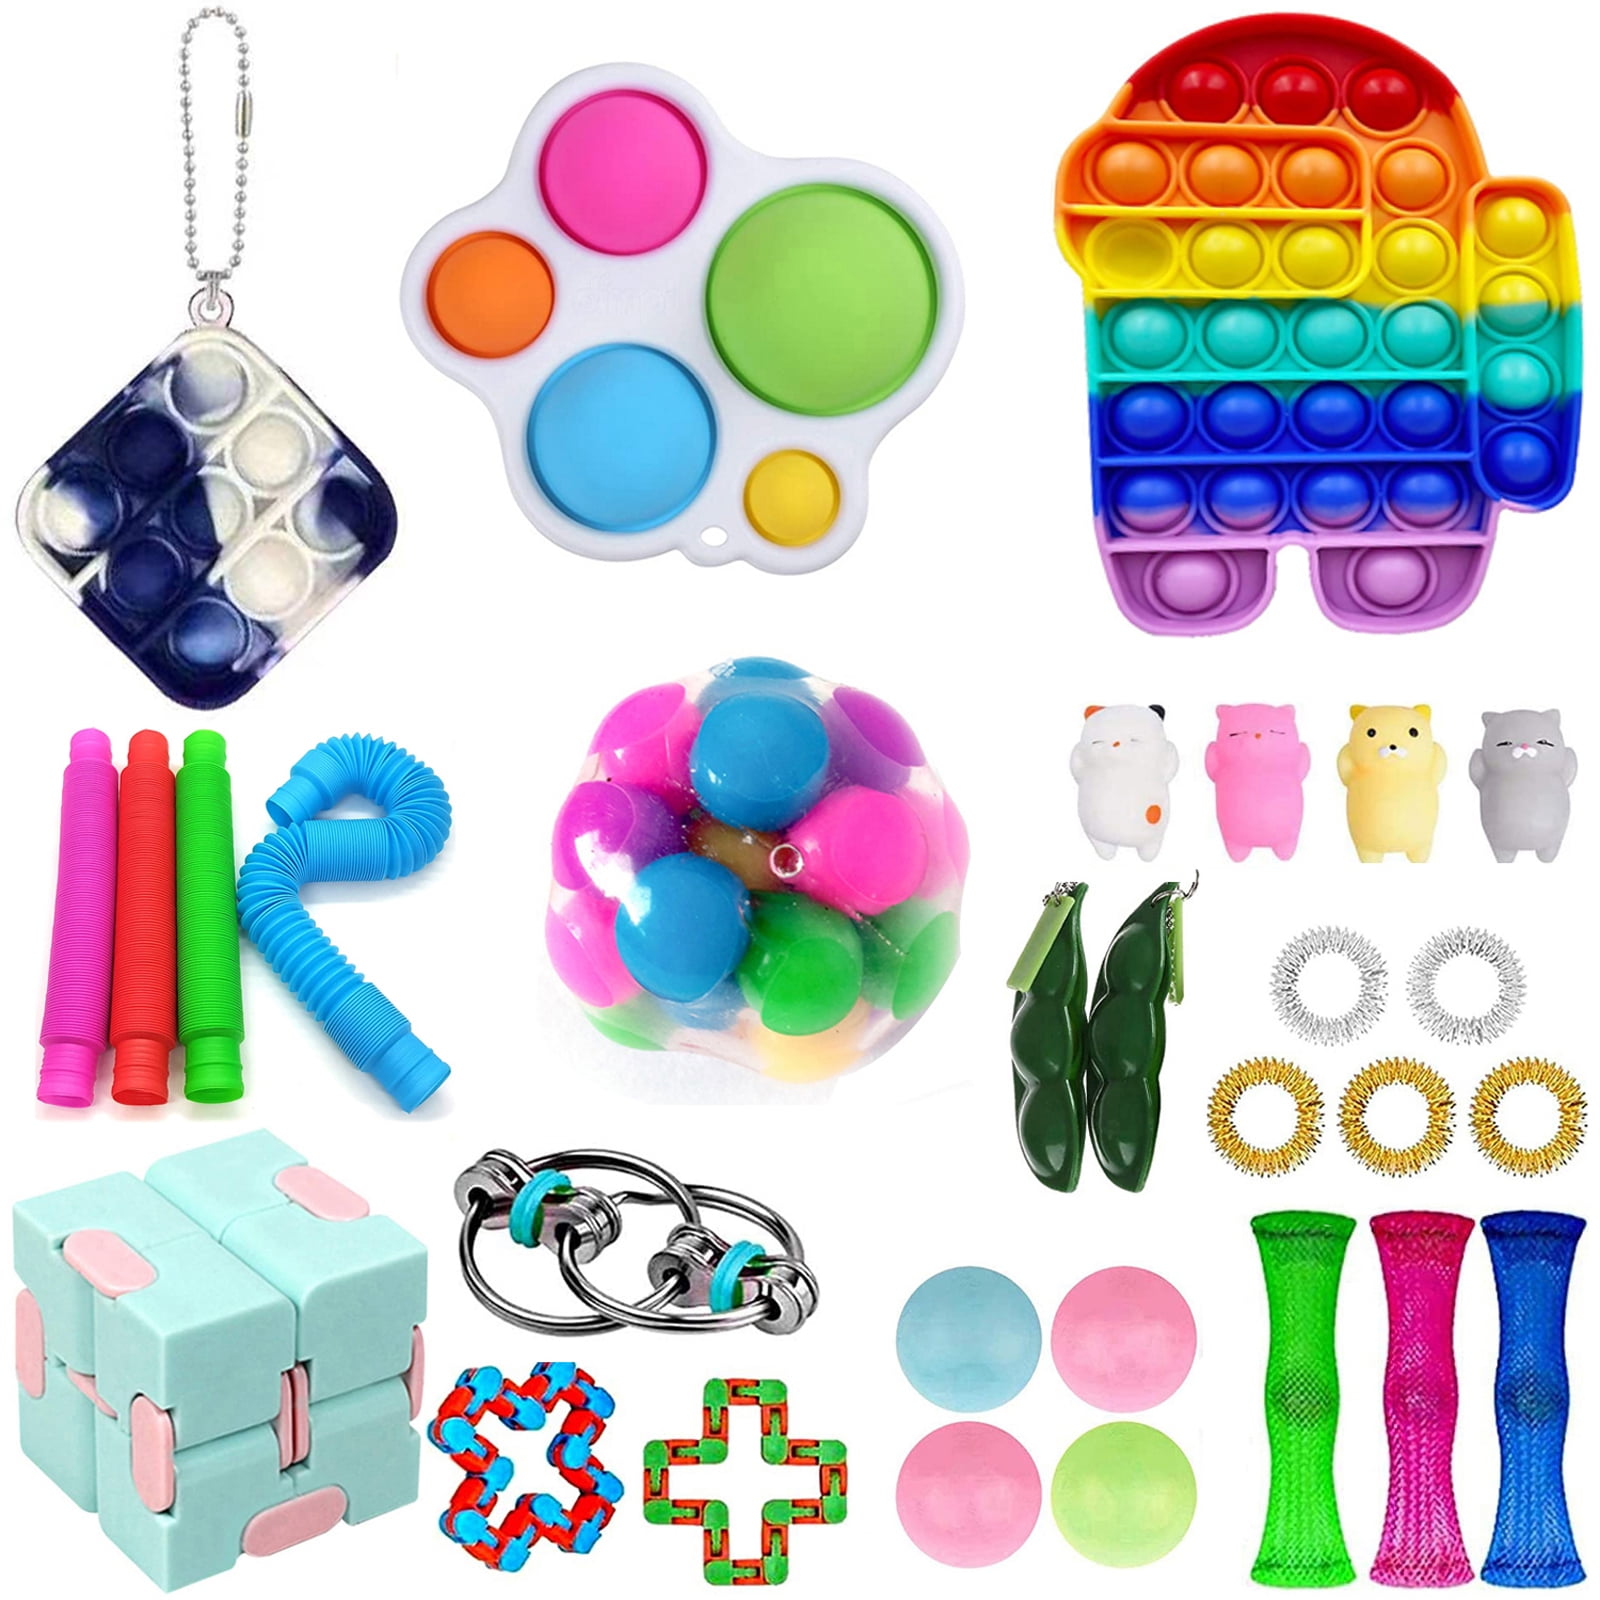 Details about   11PCS Fidget Sensory Toys Set For Anti-Anxiety Stress Relief Stocking Stuffer US 